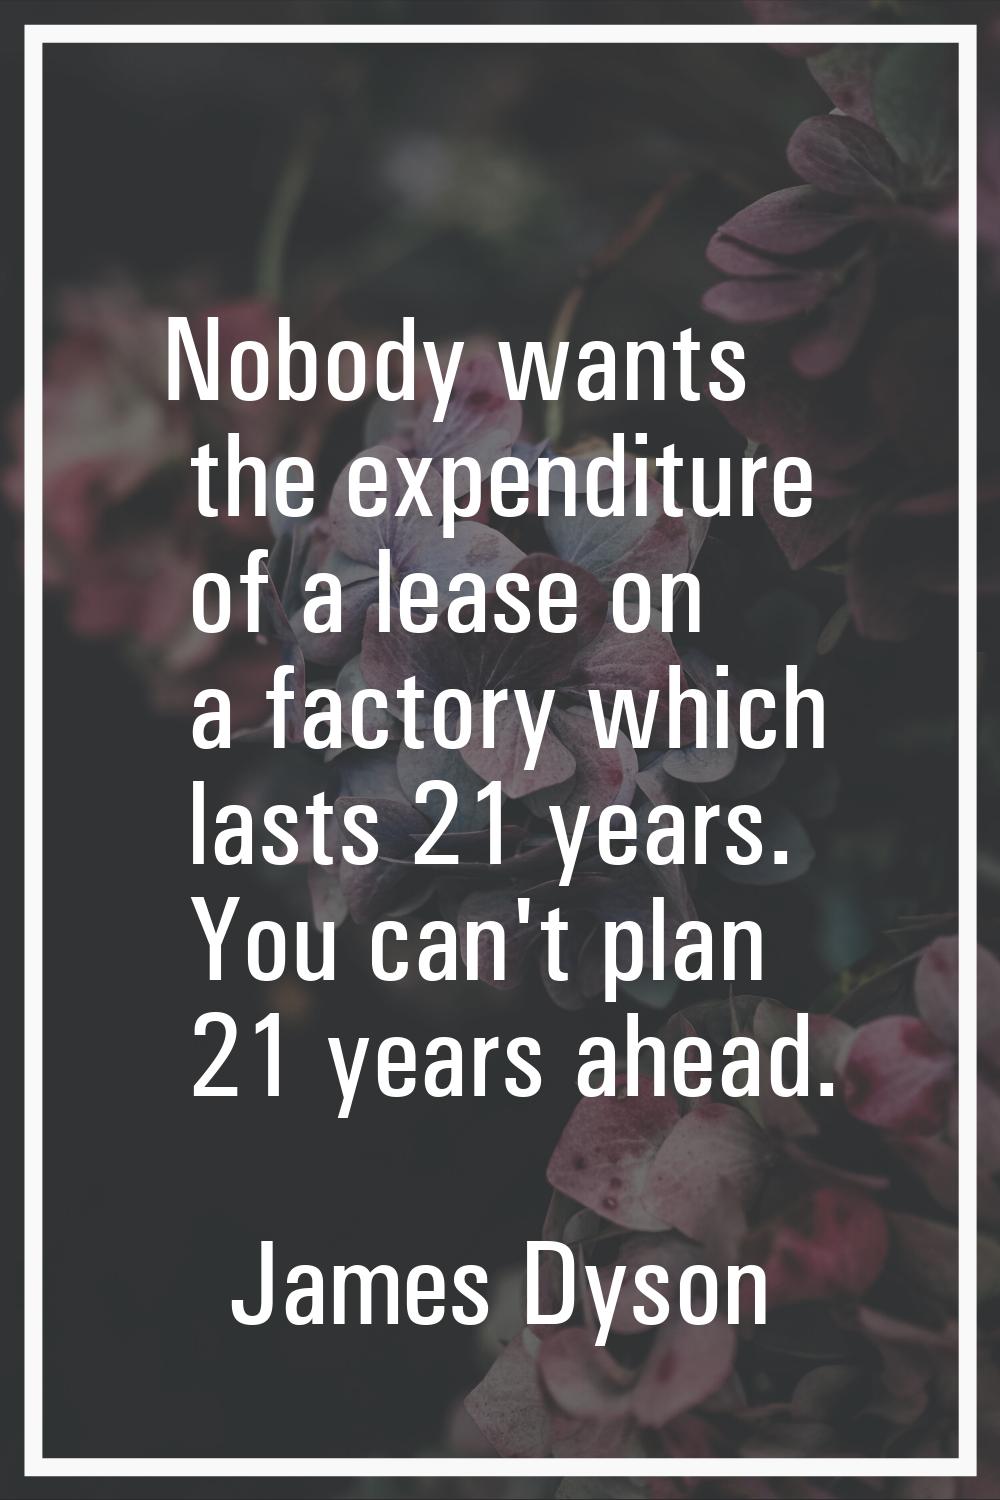 Nobody wants the expenditure of a lease on a factory which lasts 21 years. You can't plan 21 years 